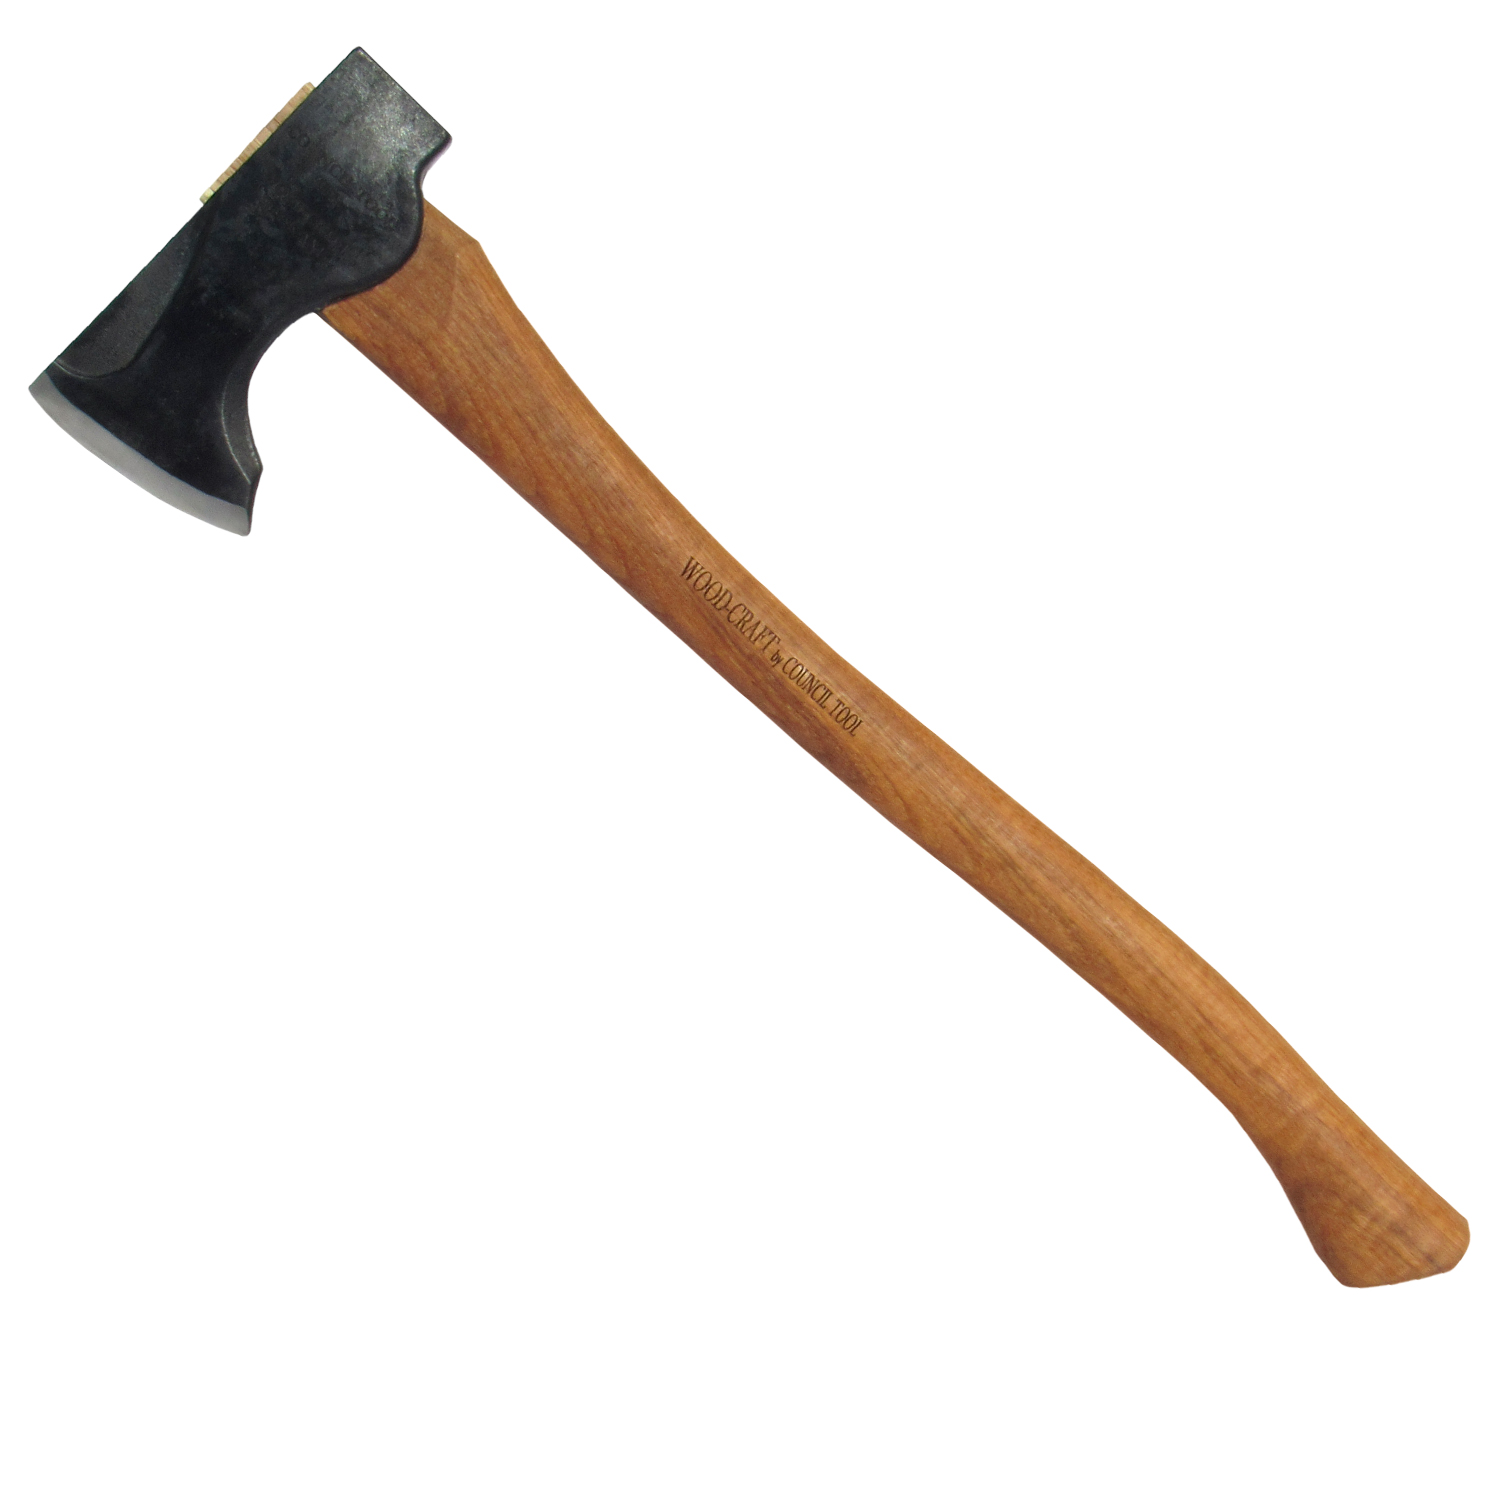 2# Wood-Craft Pack Axe, 24″ Curved Handle, Mask – Council Tool